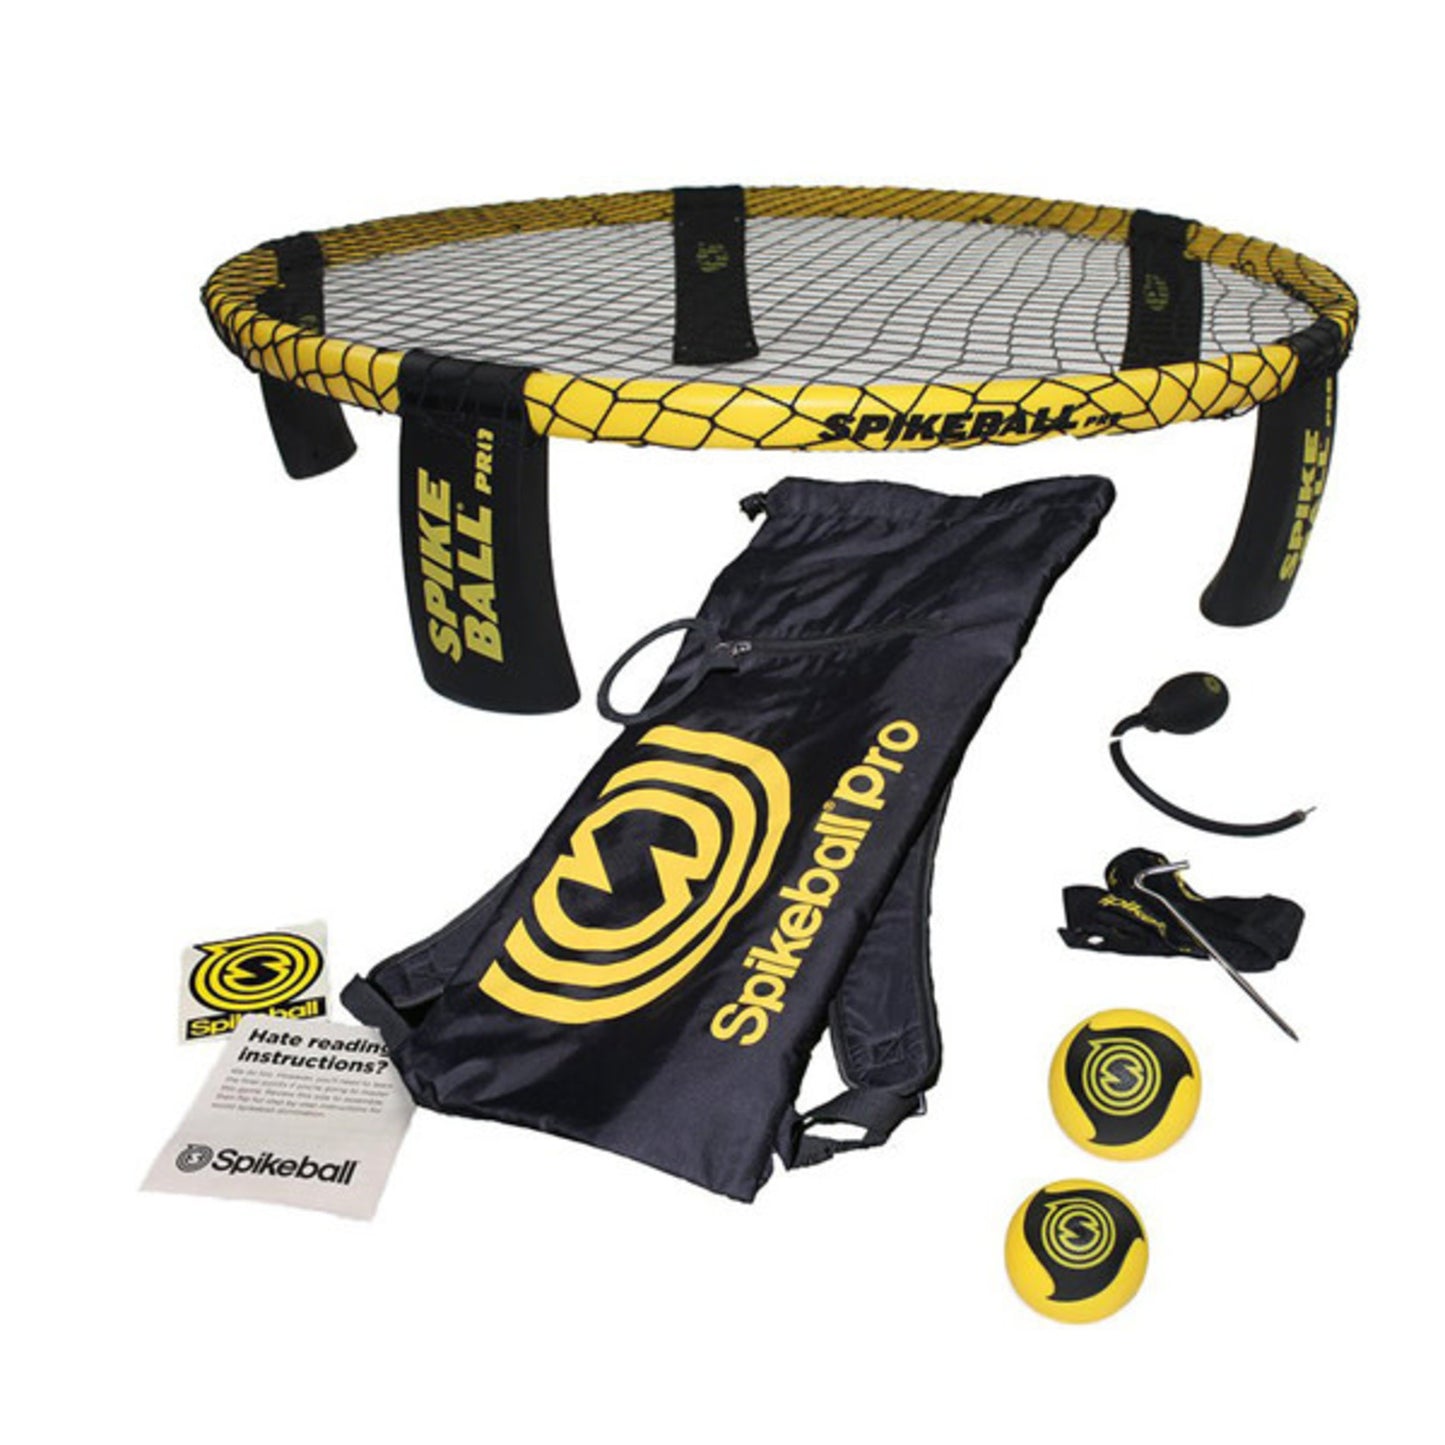 Spikeball Pro Kit - level up your game